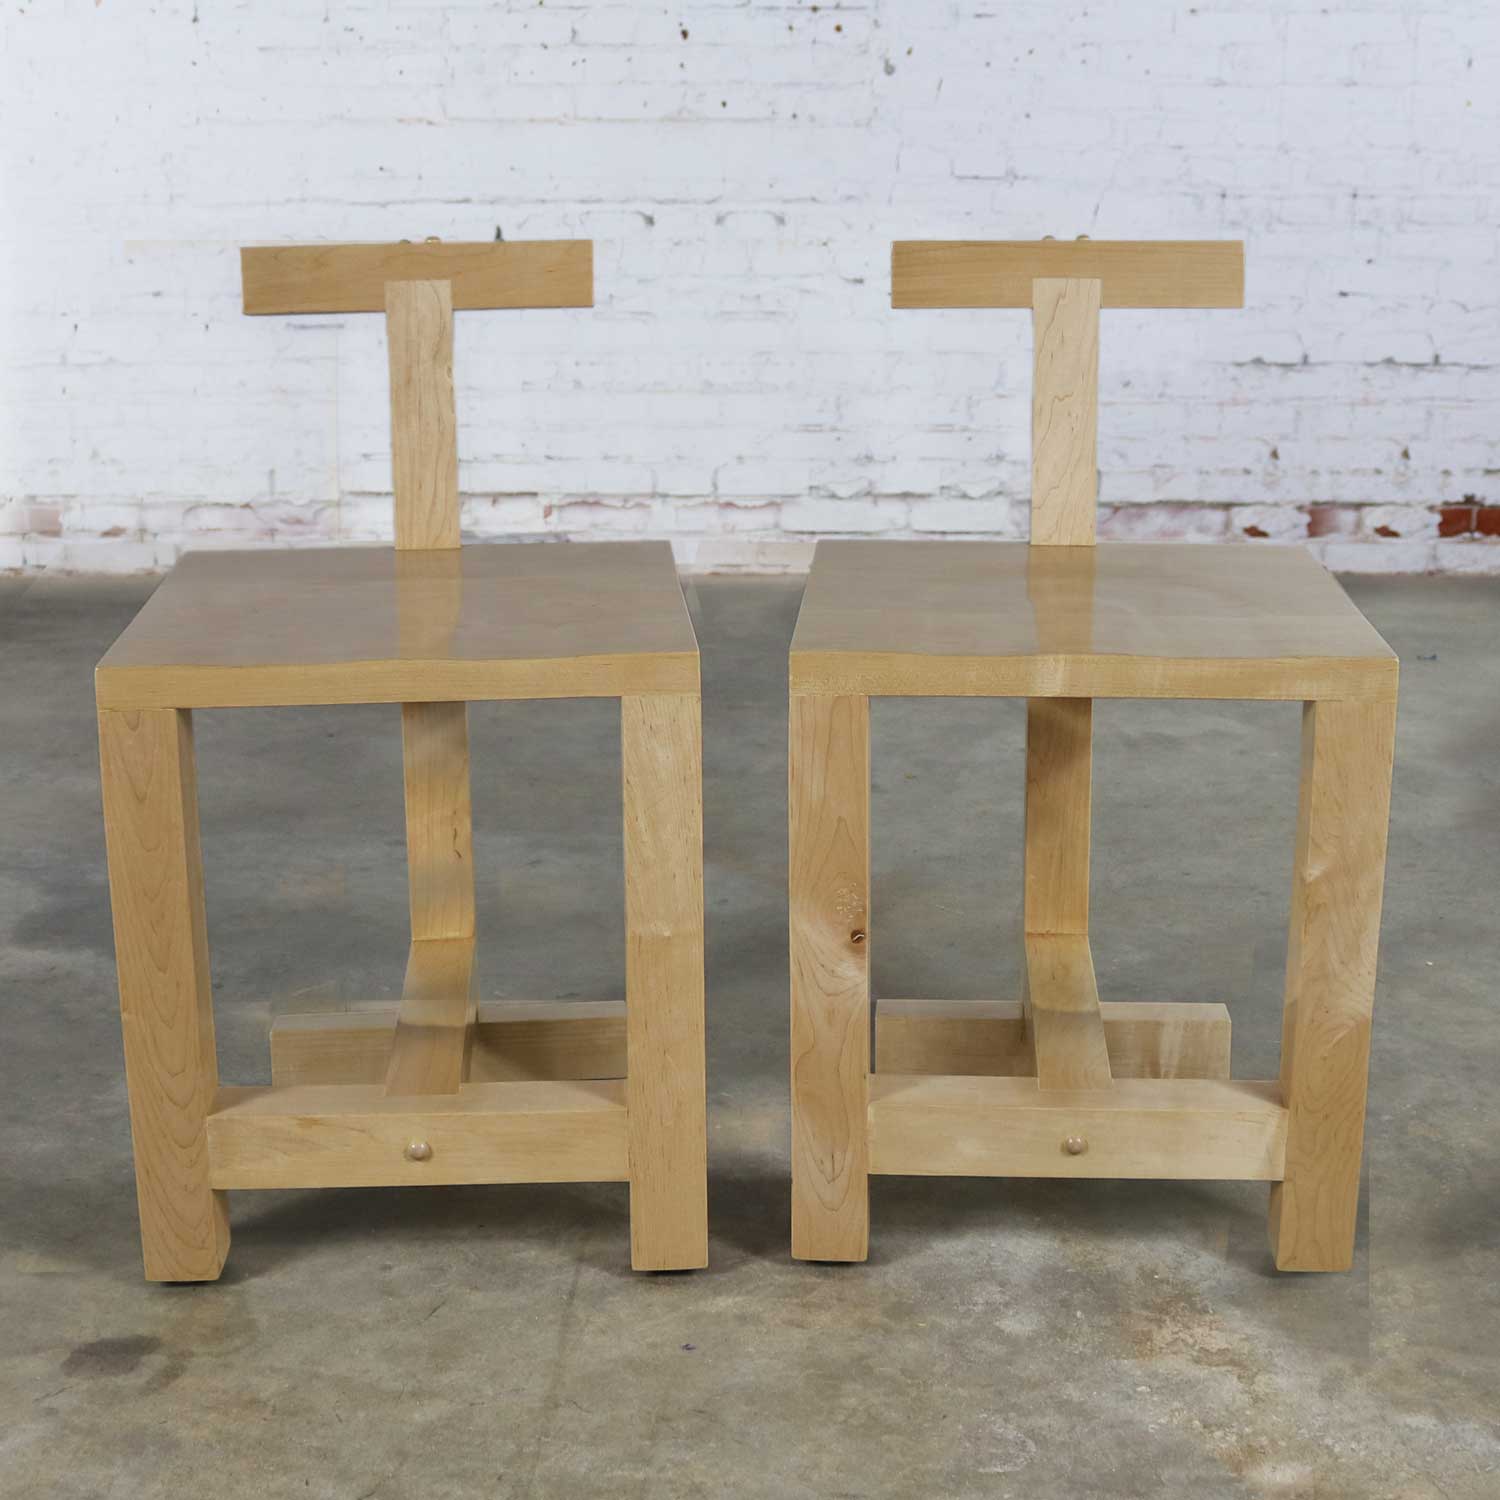 Pair Post-Modern Hand-Crafted Maple Chairs Signed Brice B. Durbin 1996